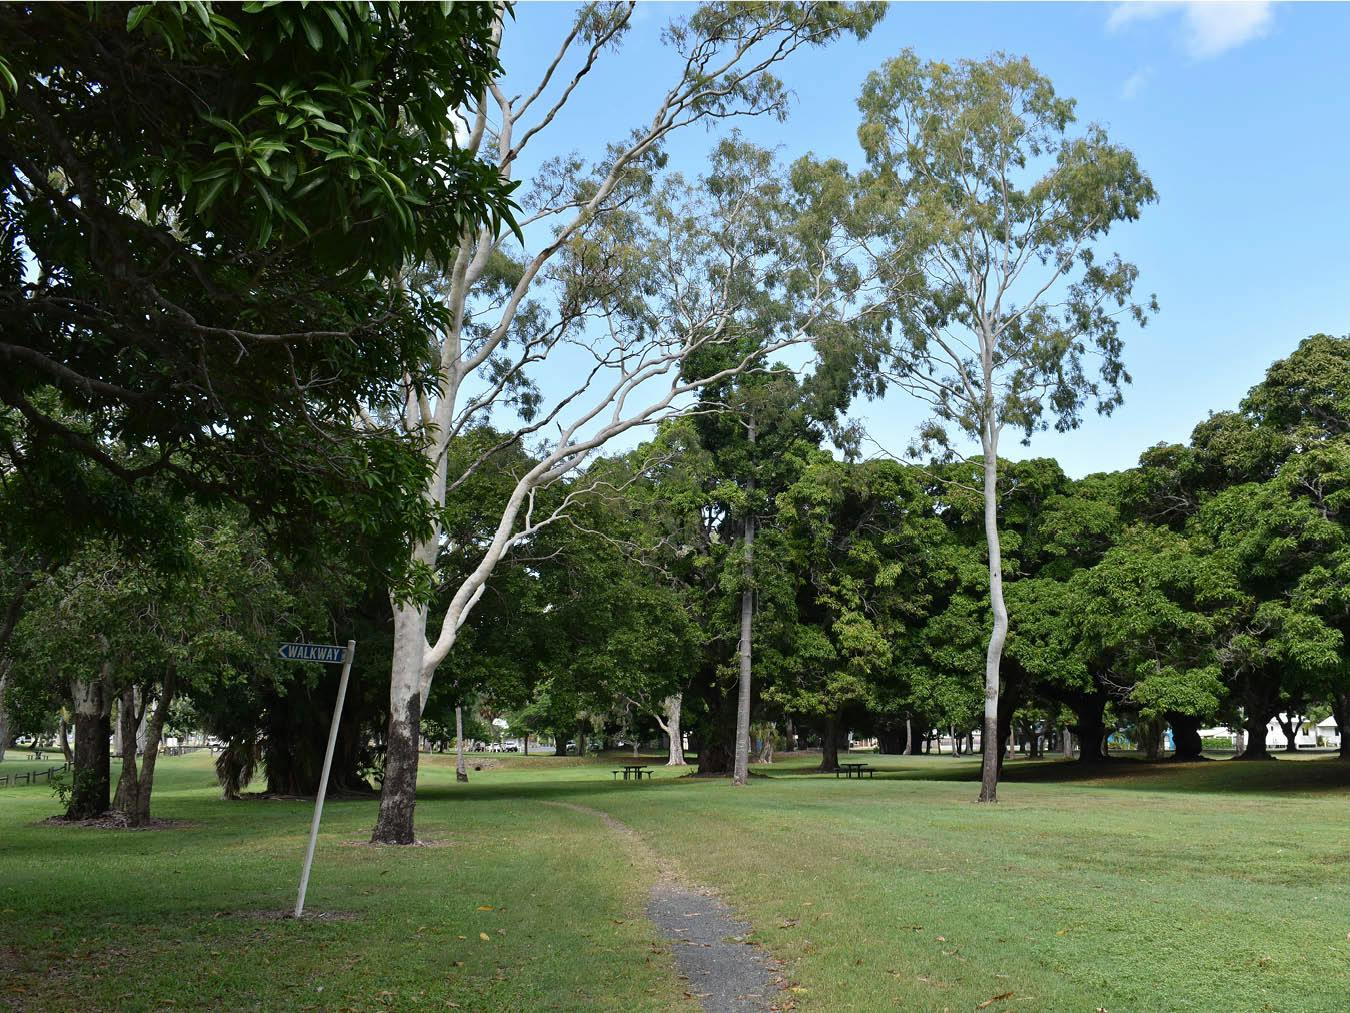 Pedestrian Track (Elizabeth Street to Seaforth Esplanade Road)  - This photograph is looking east from the track towards the parking area servicing the swimming enclosure and associated picnic area.